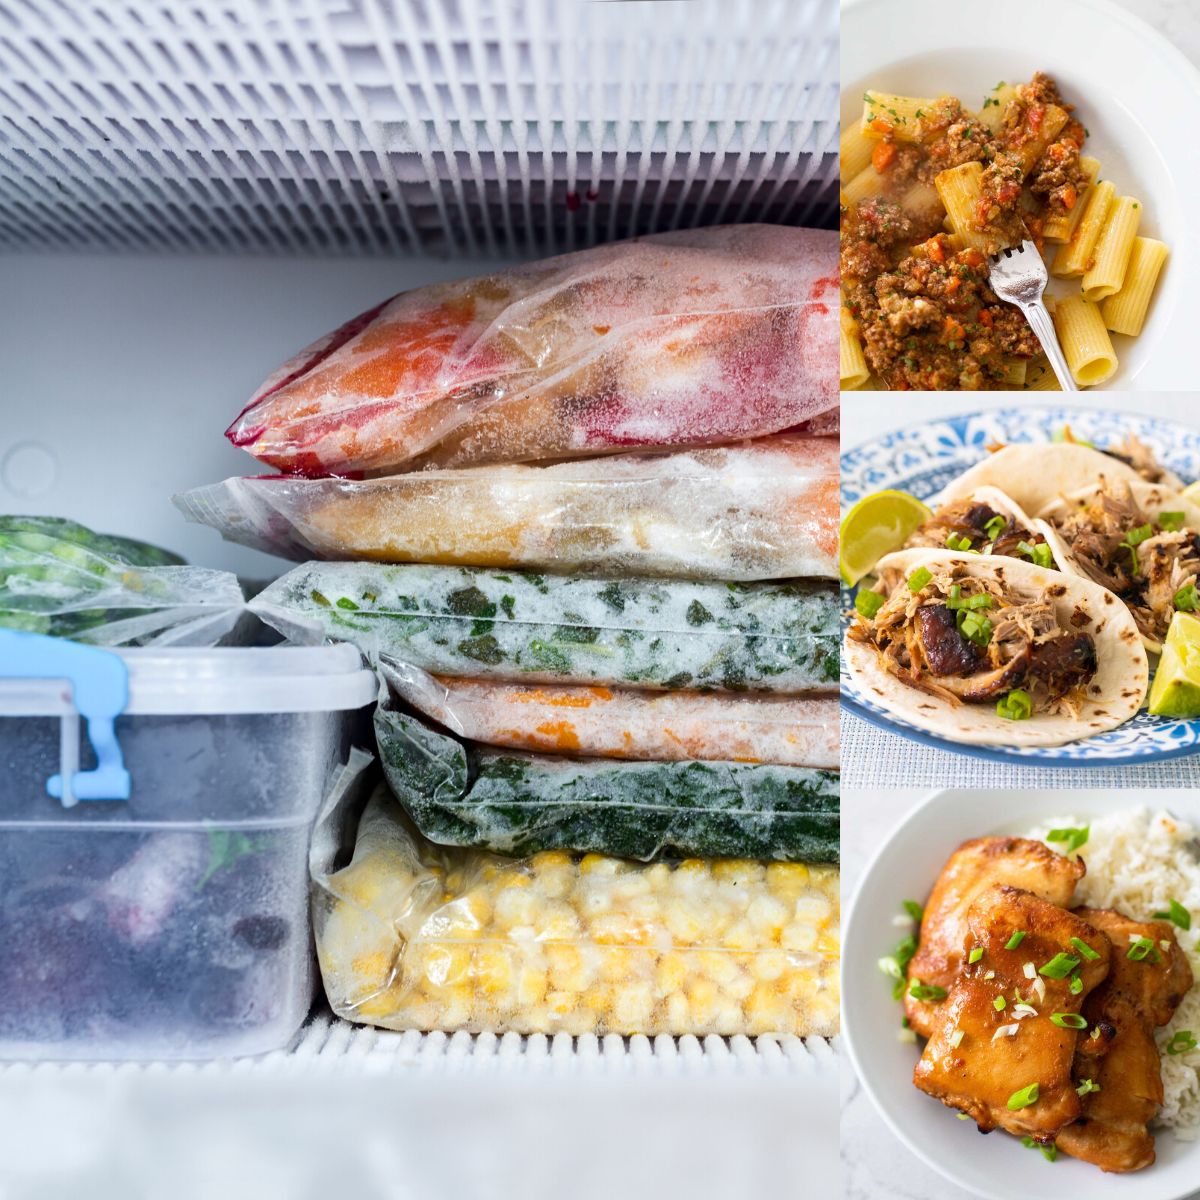 A photo collage shows a stack of meals inside the freezer next to the photos of the food cooked on a plate.